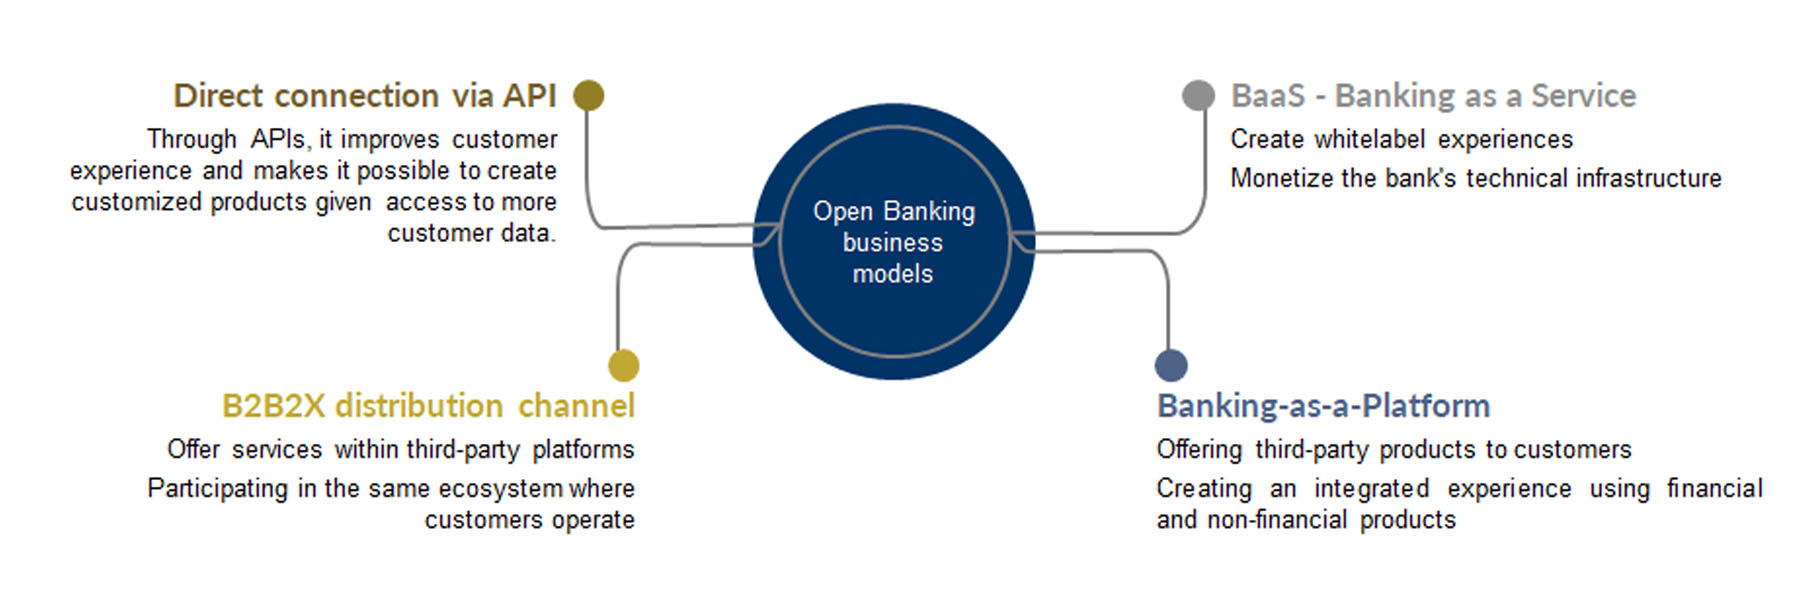 Open Banking business models